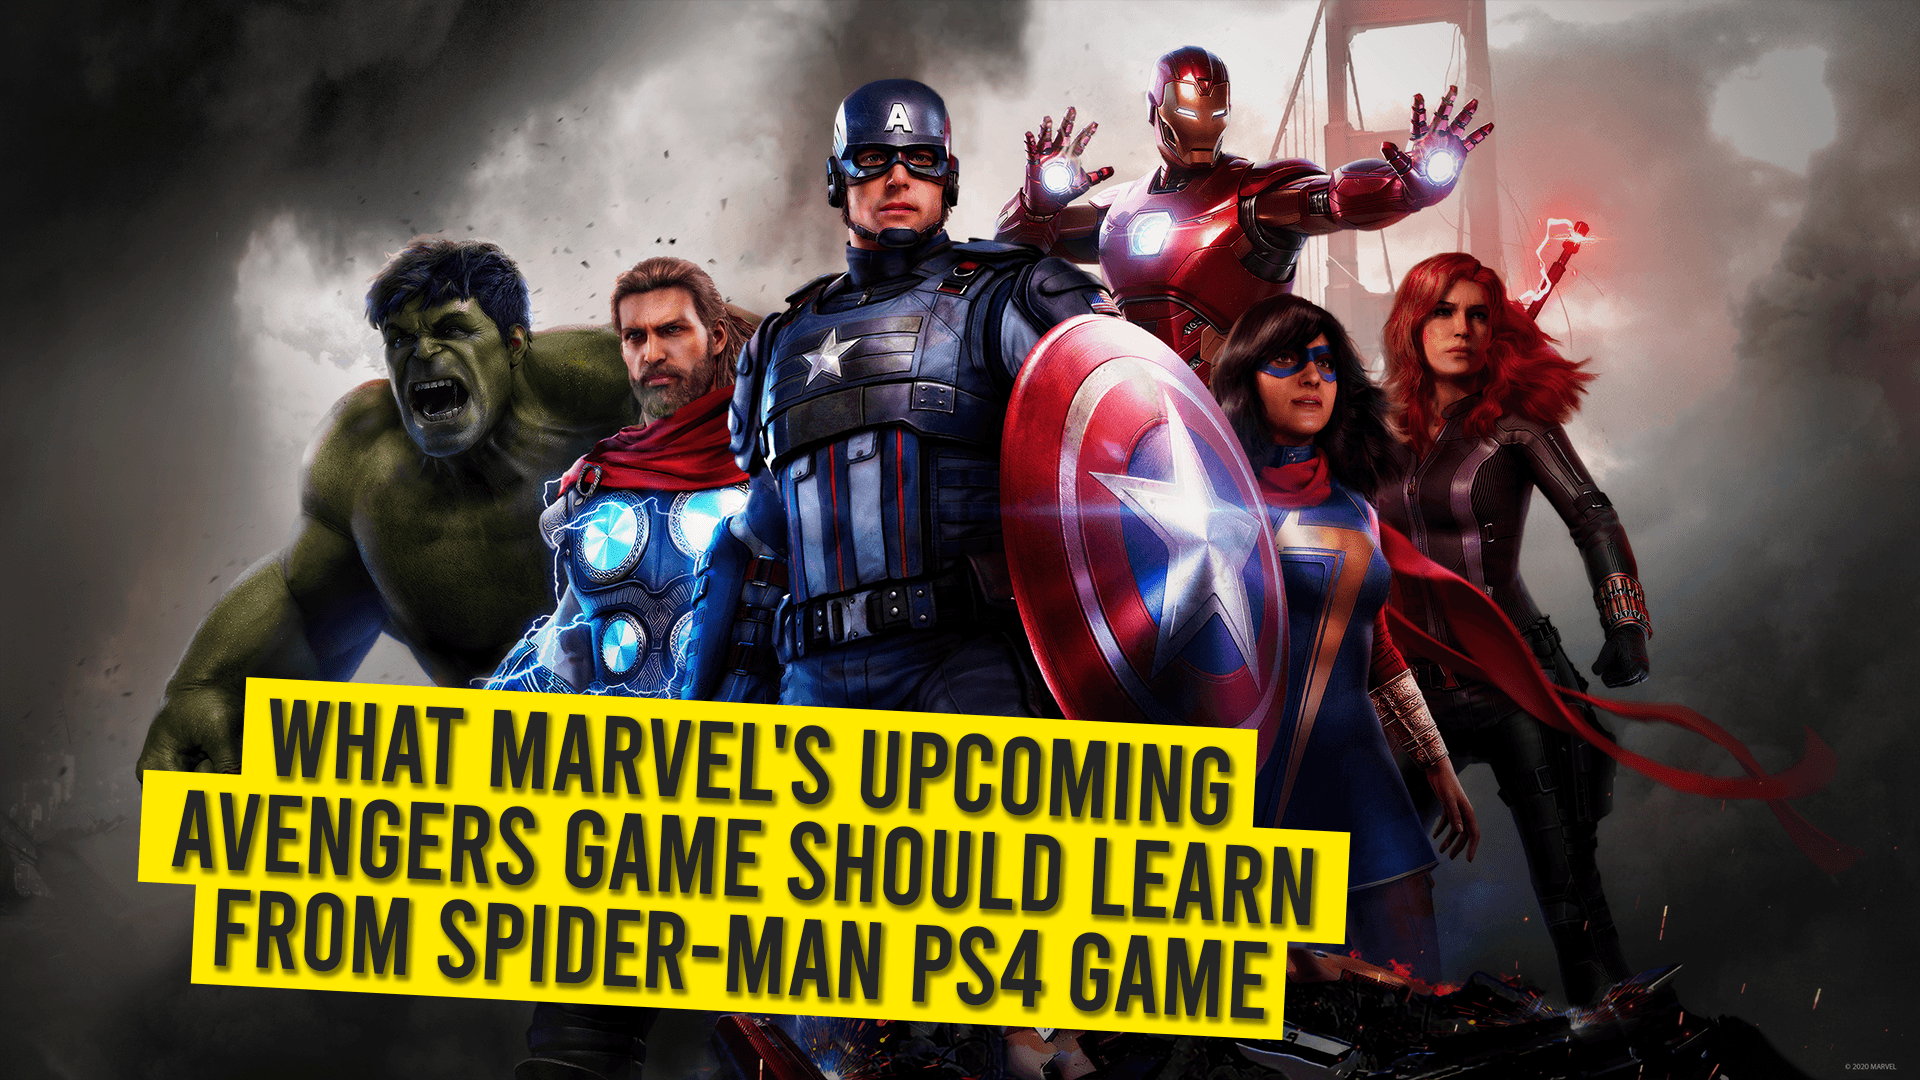 What Marvel’s Upcoming Avengers Game Should Learn From Spider-Man PS4 Game